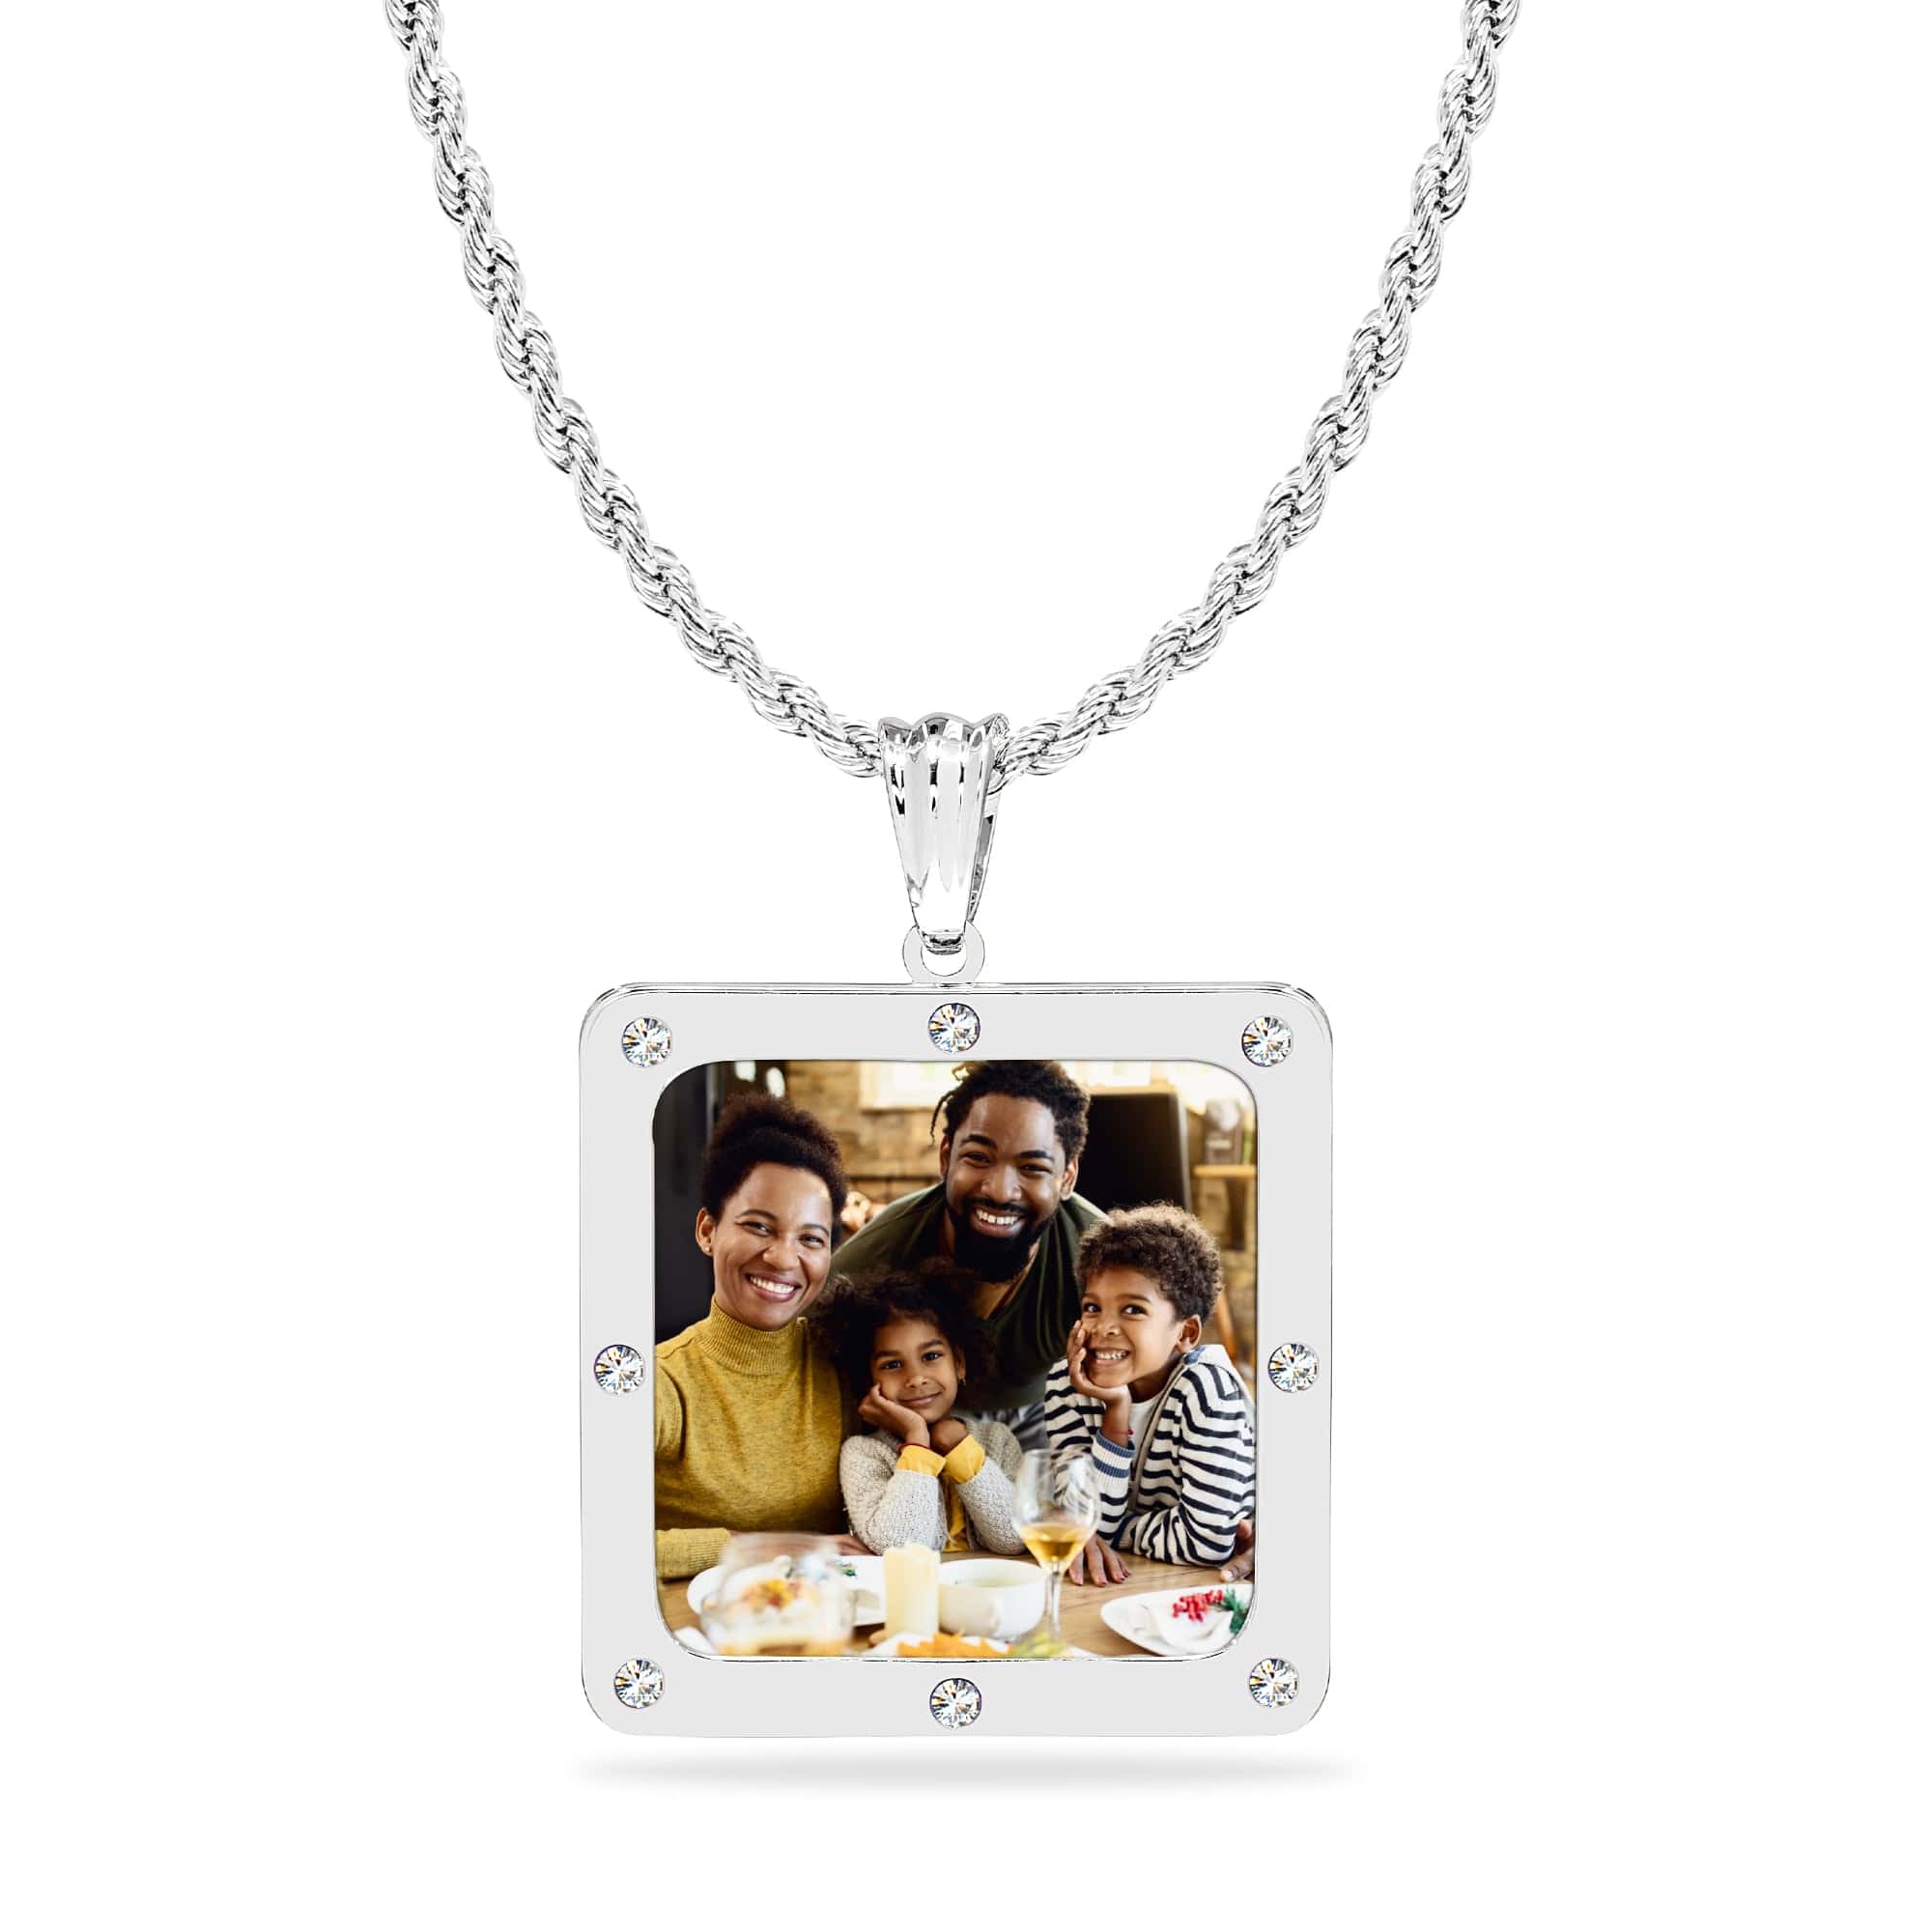 Copy of High Polished Square Photo Pendant